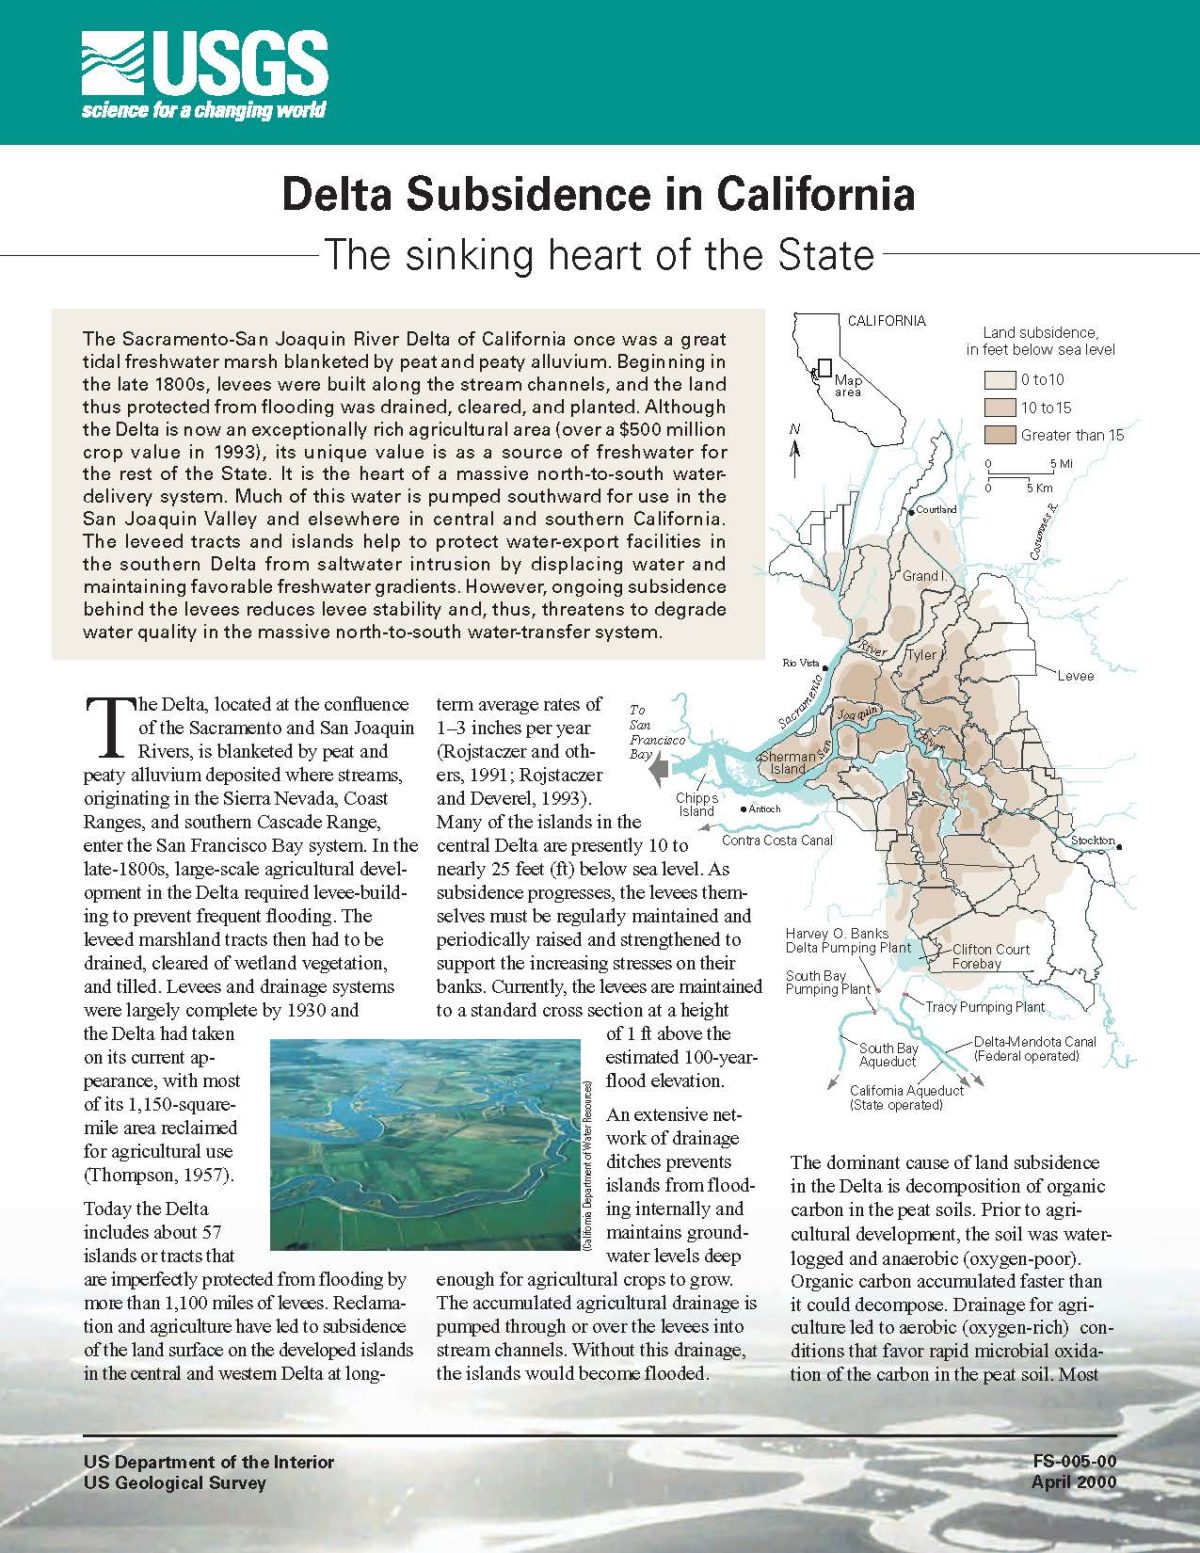 Delta Subsidence in California: The sinking heart of the state